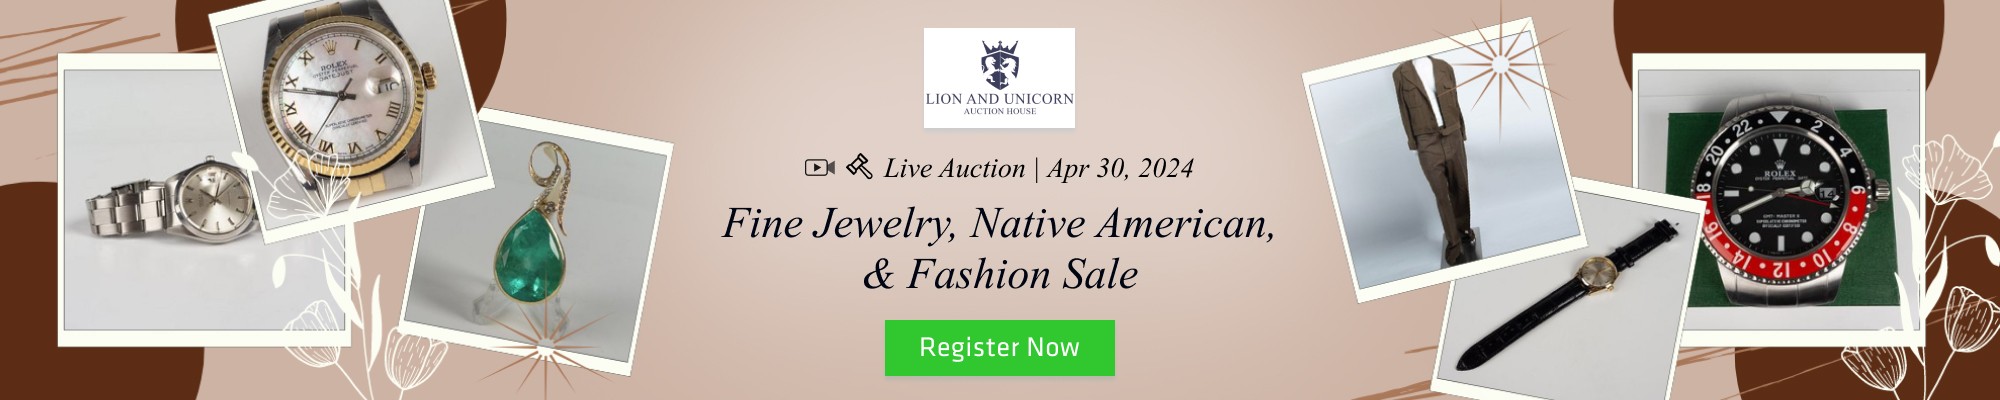 https://www.bidsquare.com/auctions/whitleys-auctioneers/fine-jewelry-native-american-fashion-sale-15514